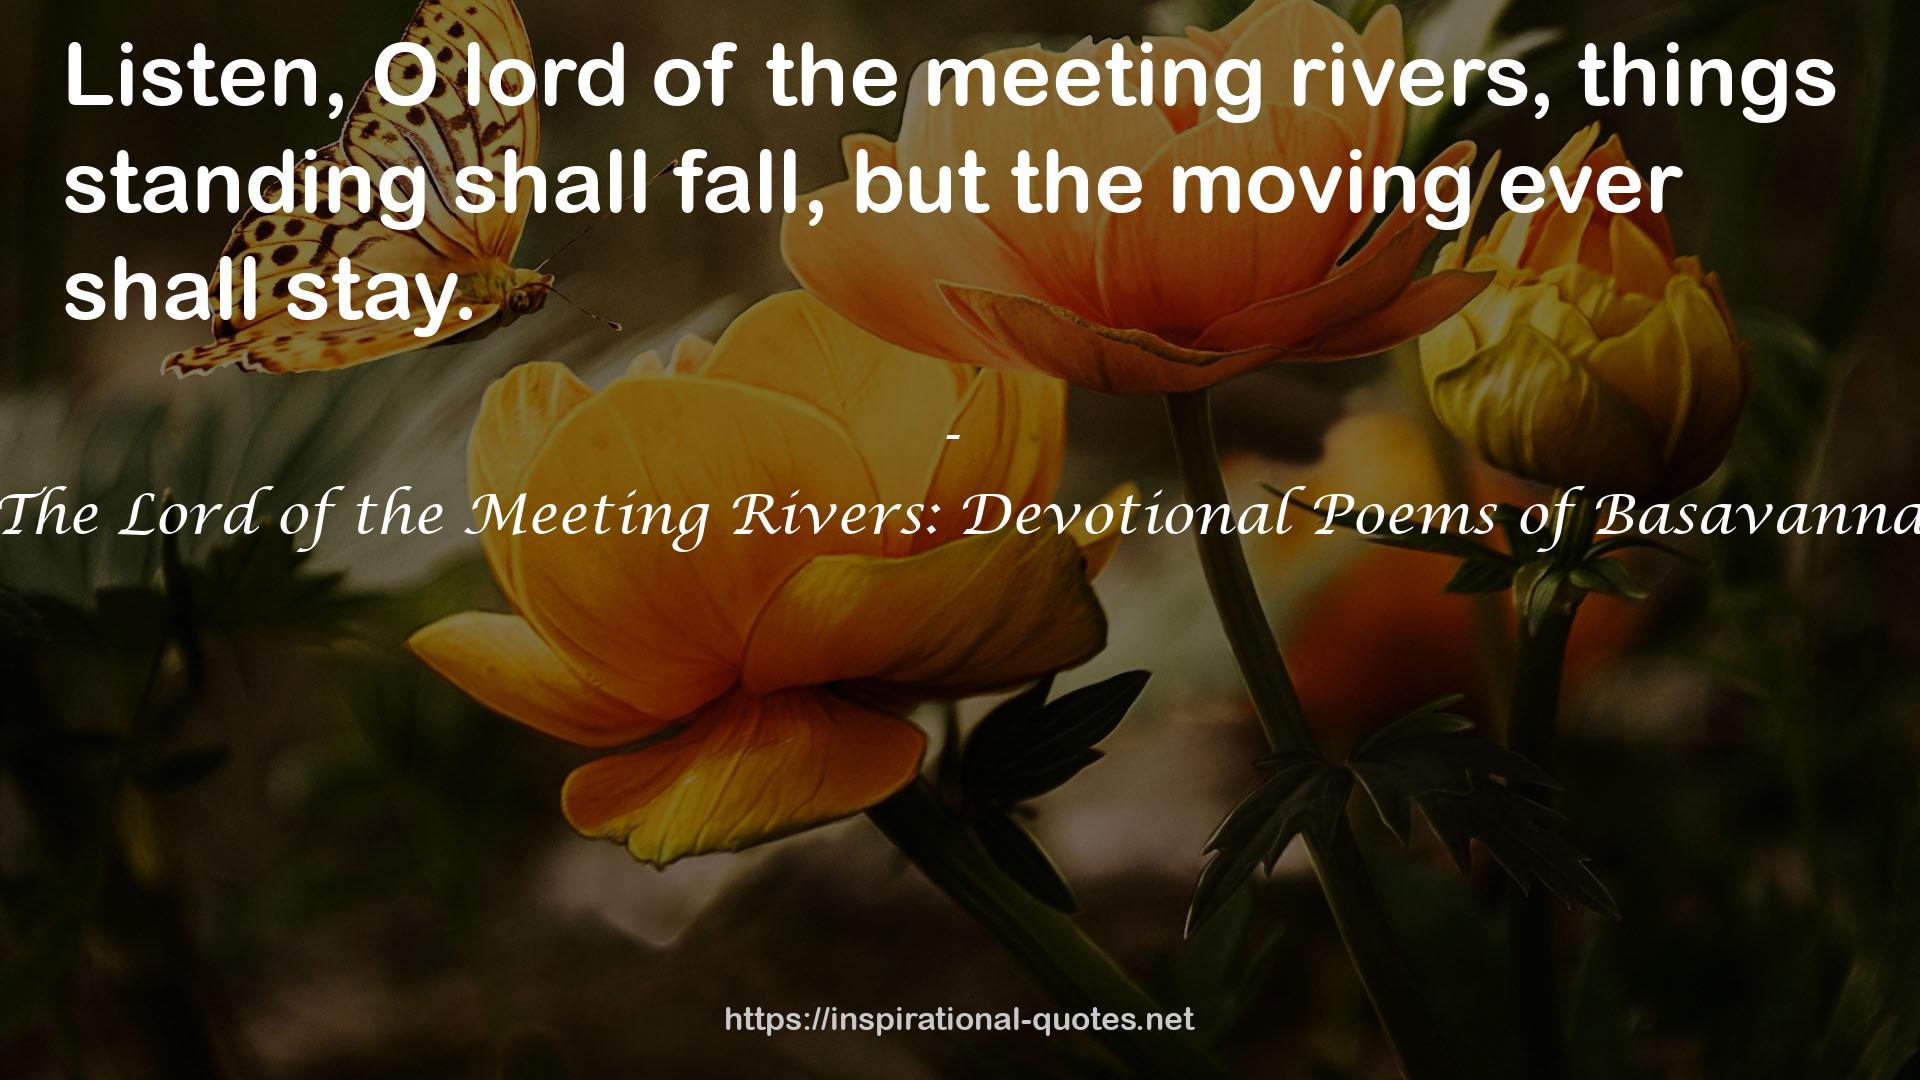 The Lord of the Meeting Rivers: Devotional Poems of Basavanna QUOTES